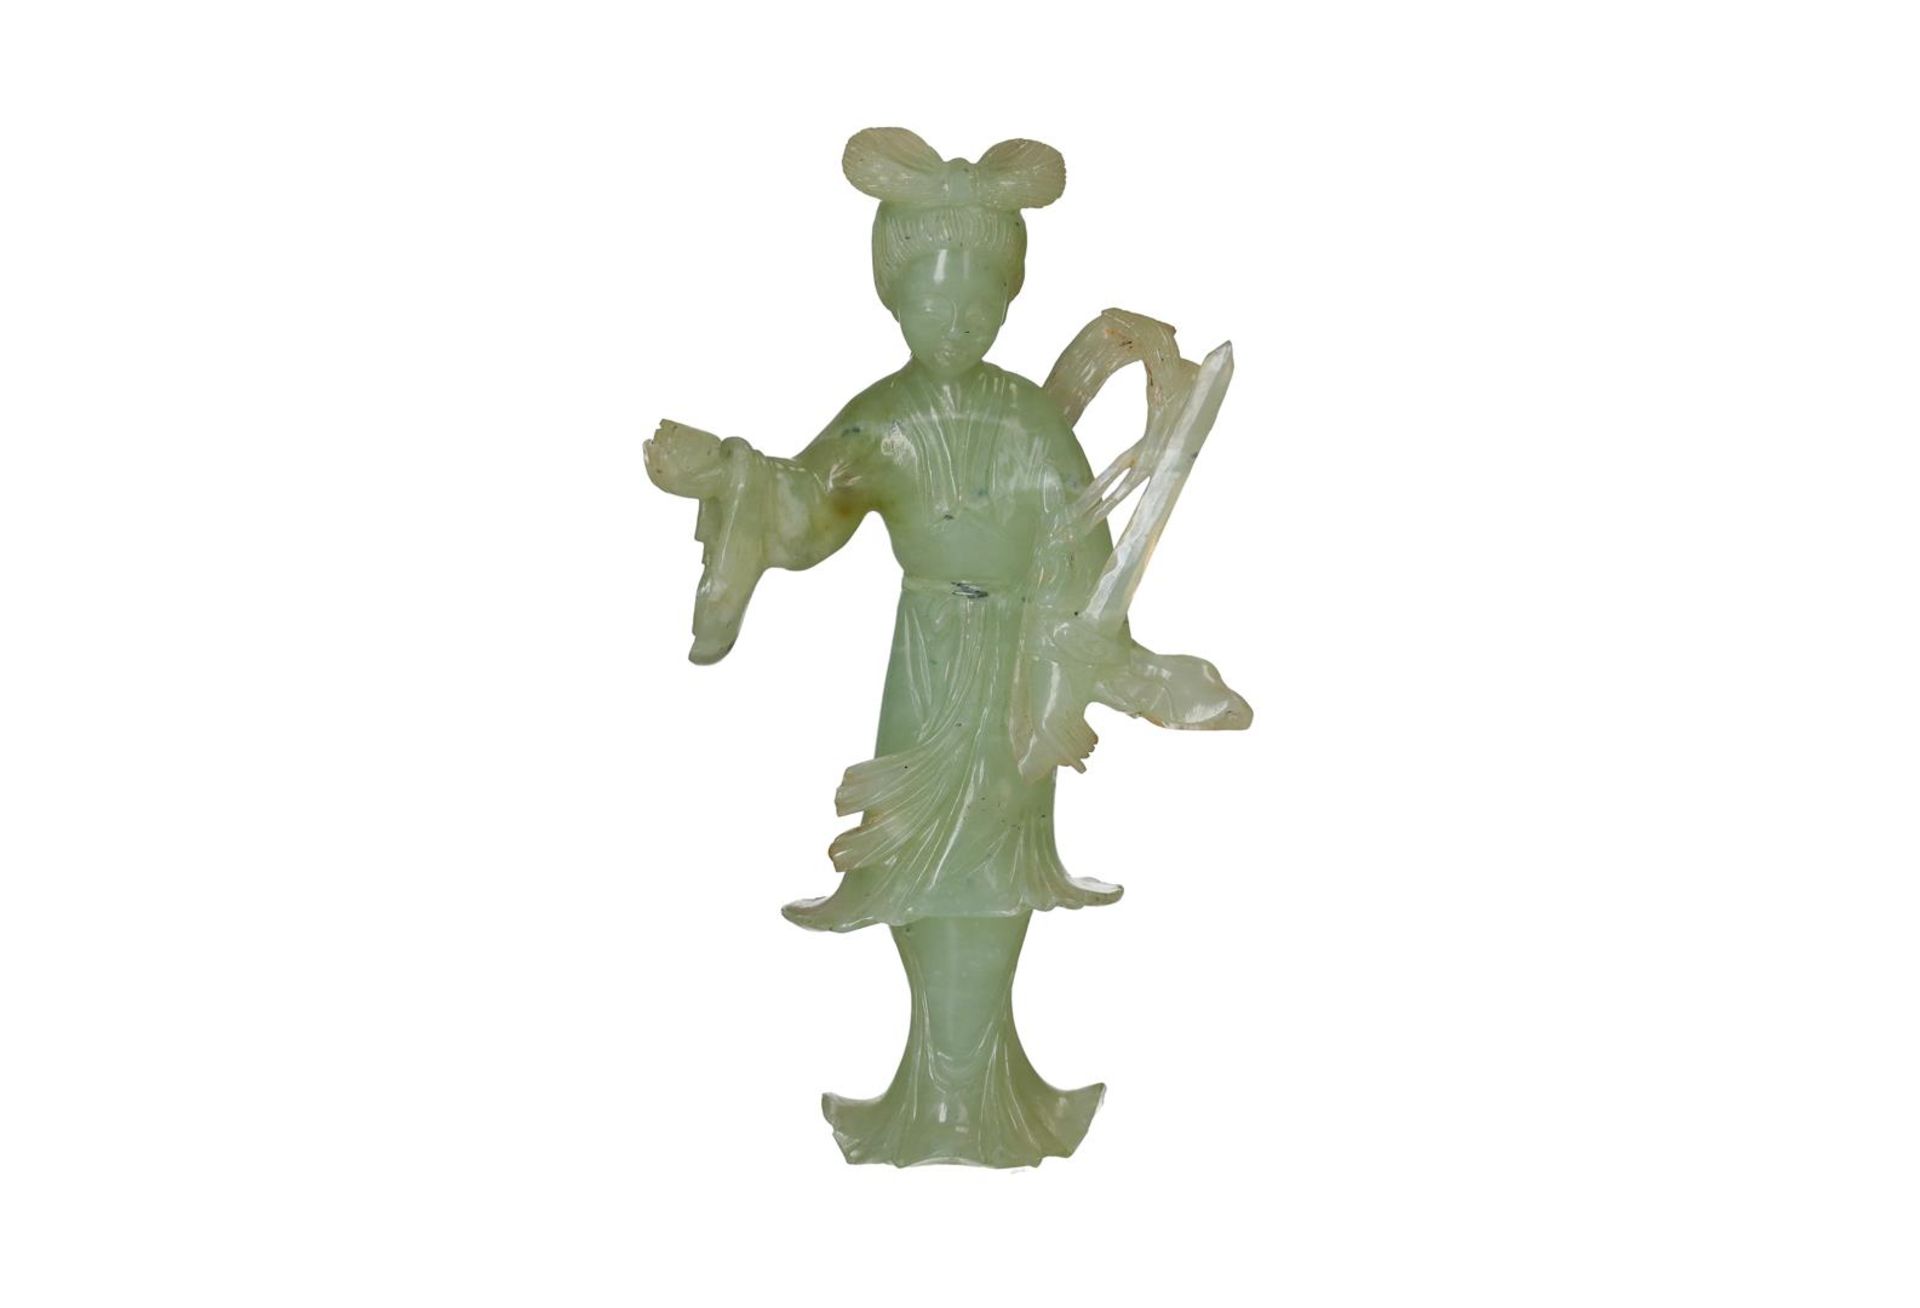 A carved jade sculpture of a woman holding valuables. China, 20th century. H. 15.5 cm. Condition